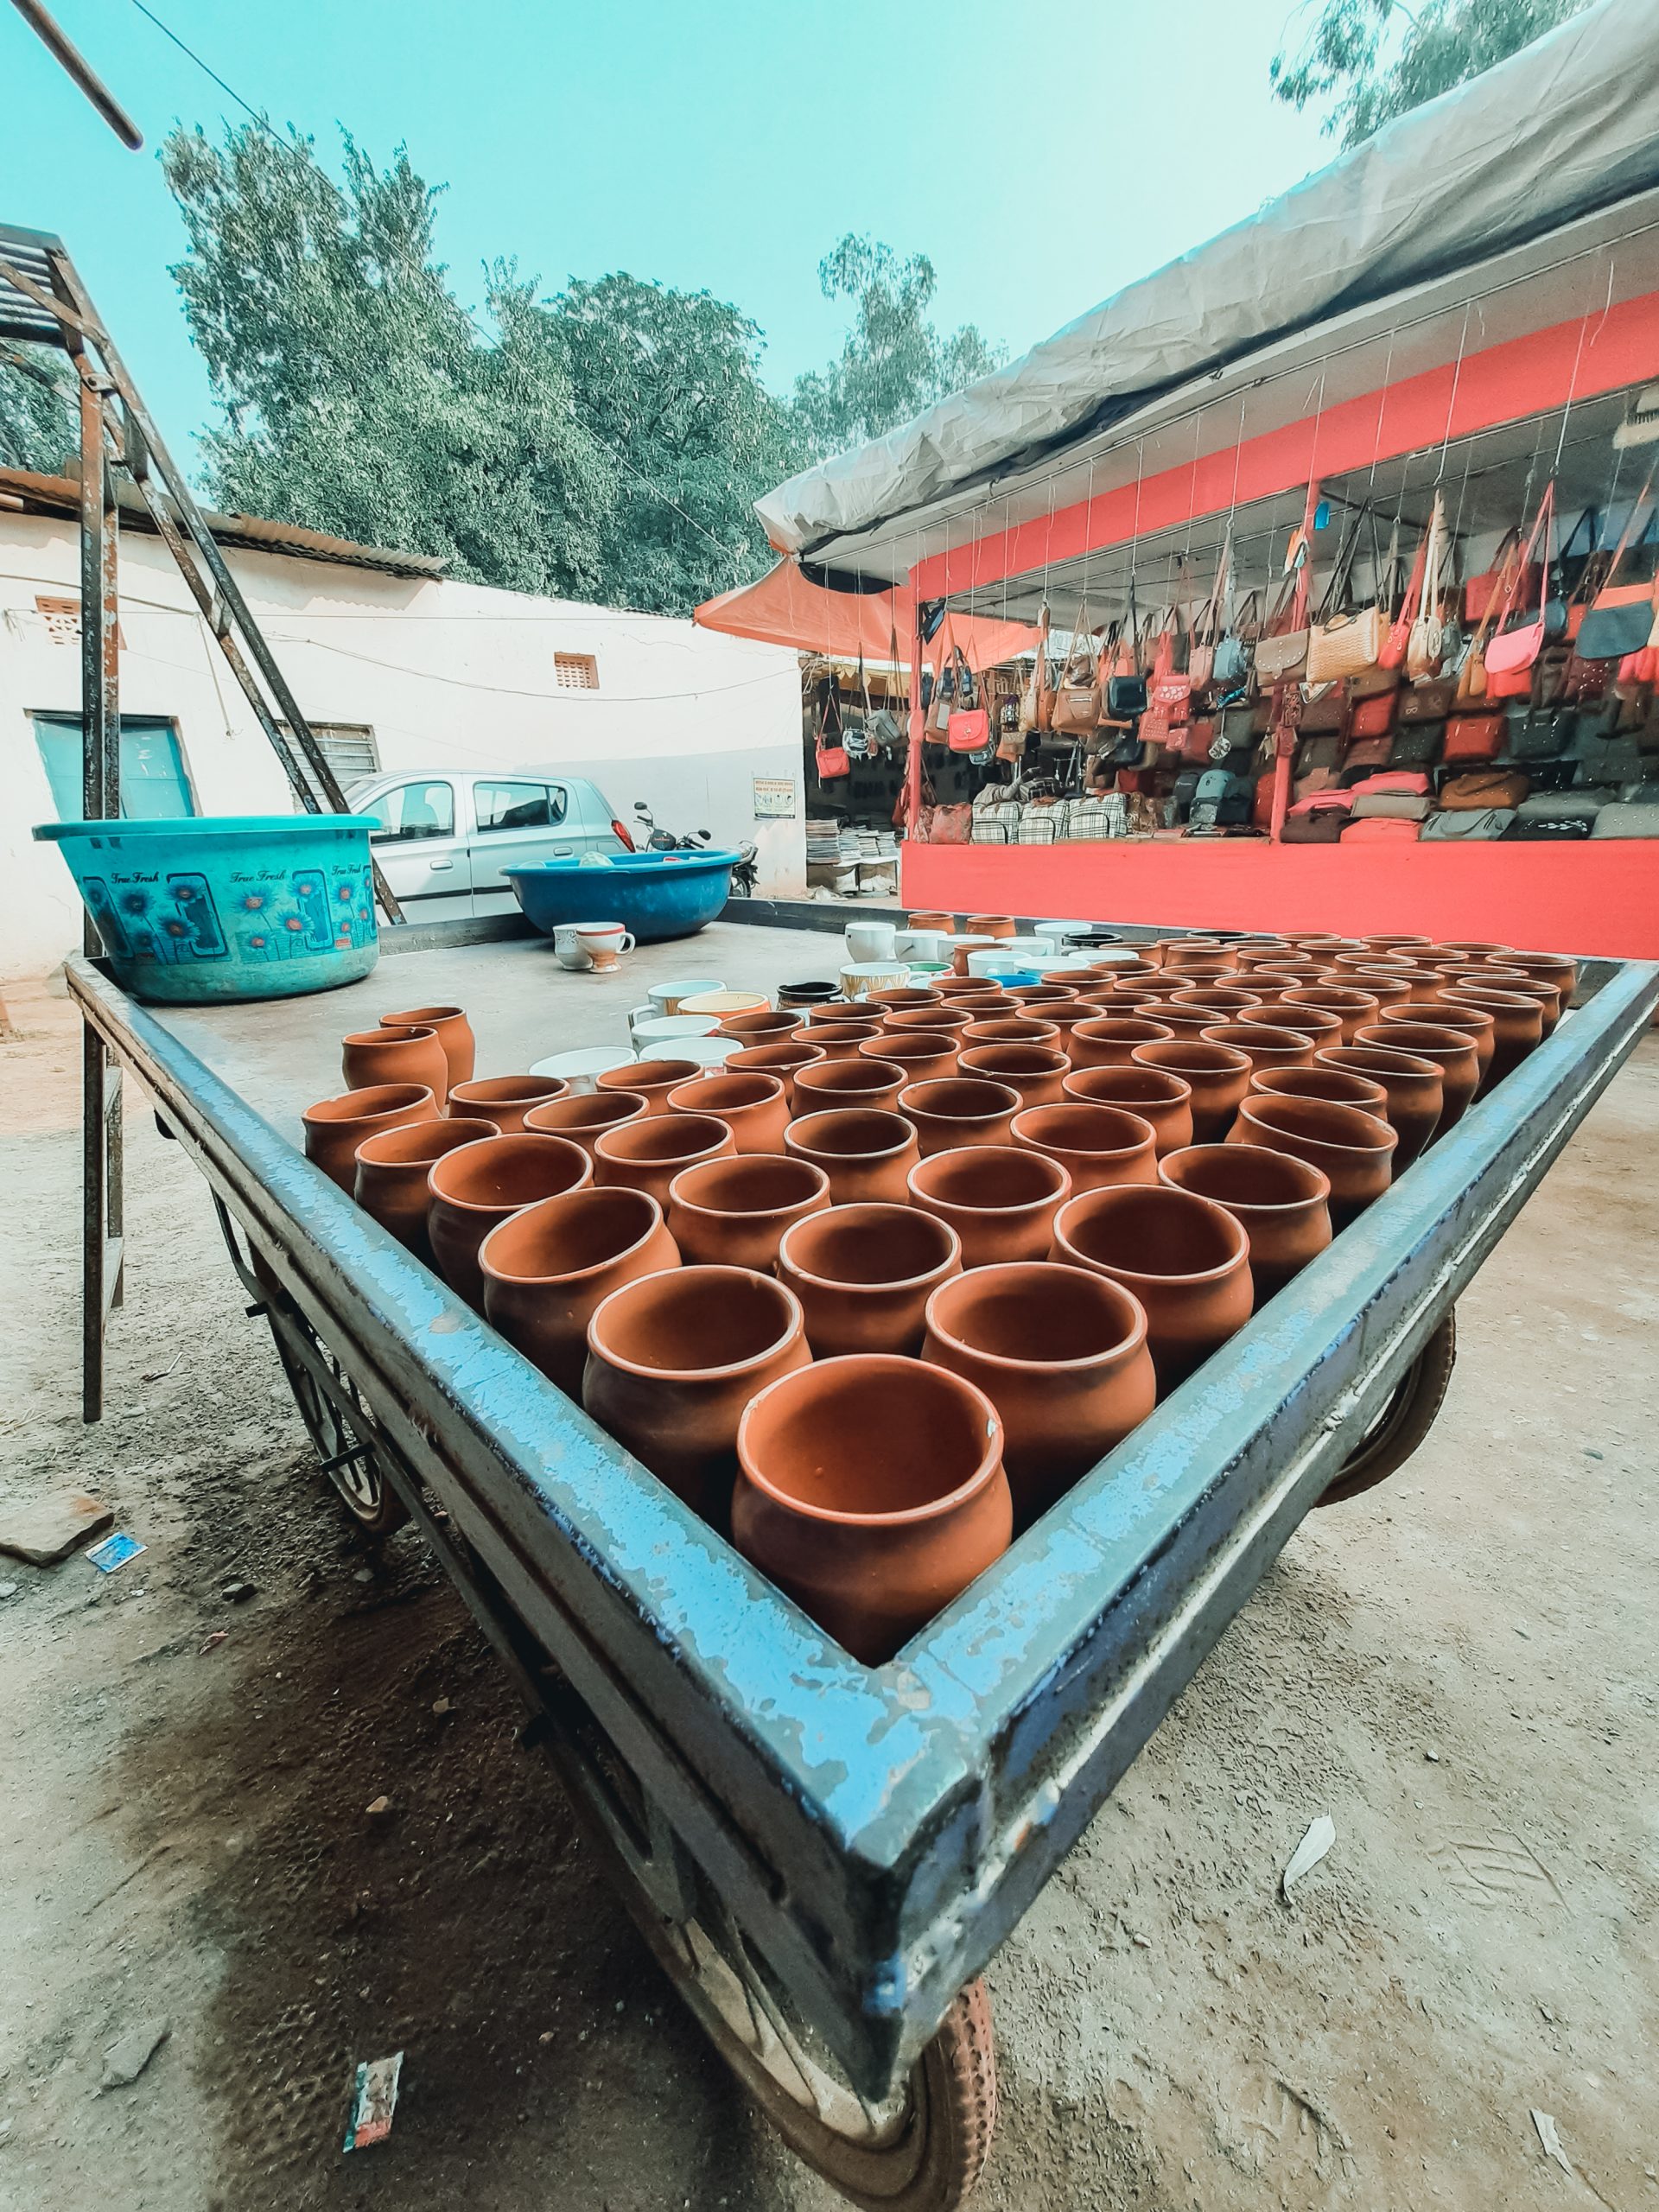 Clay pots on a cart